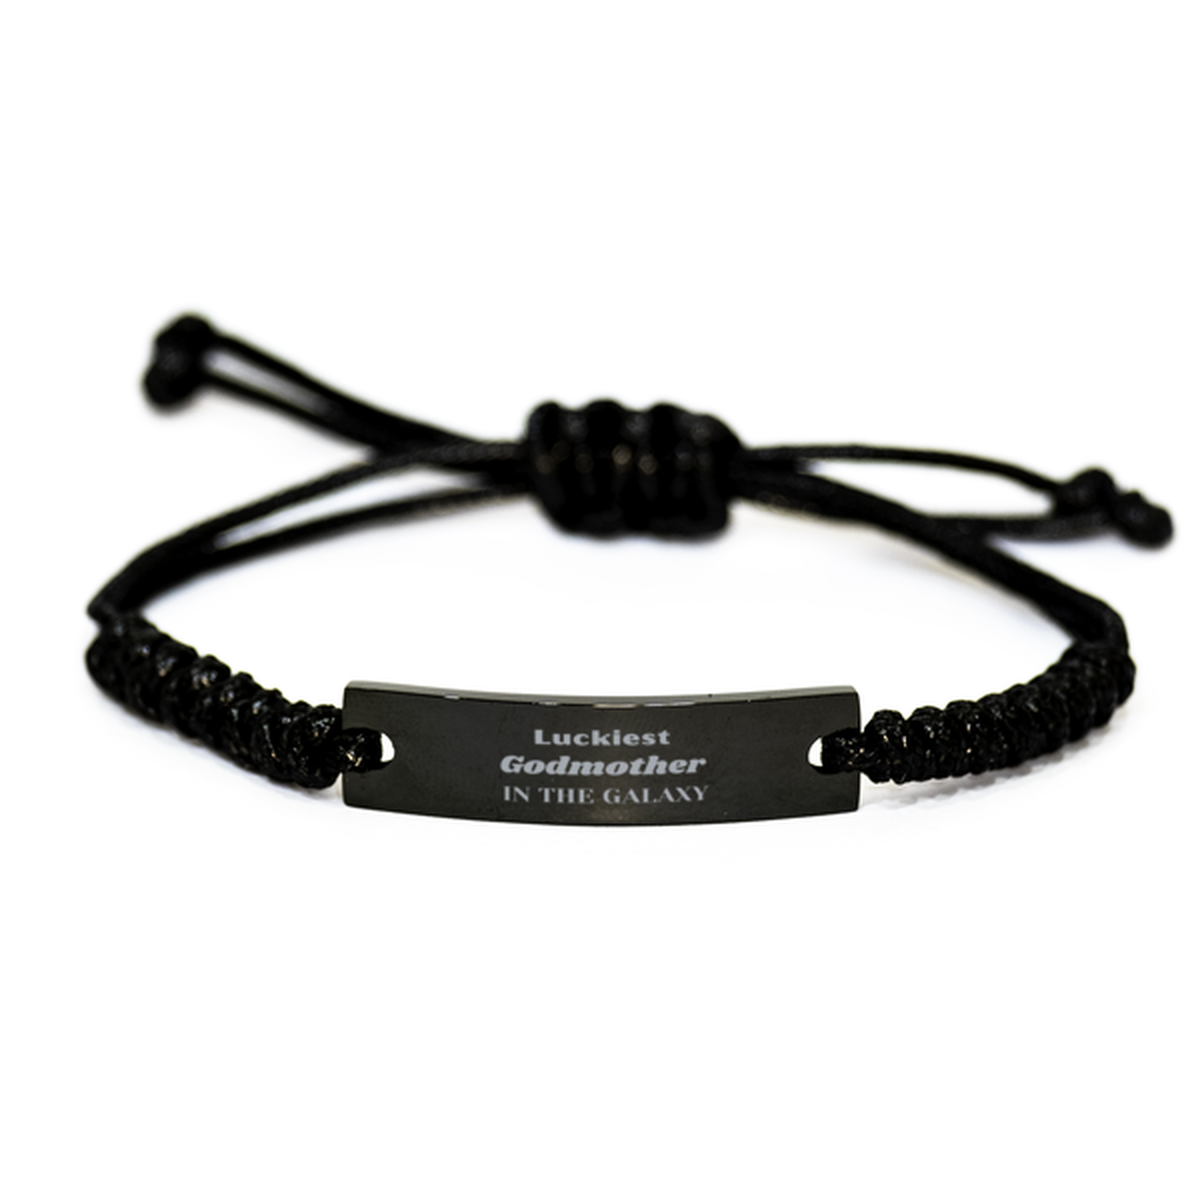 Luckiest Godmother in the Galaxy, To My Godmother Engraved Gifts, Christmas Godmother Black Rope Bracelet Gifts, X-mas Birthday Unique Gifts For Godmother Men Women